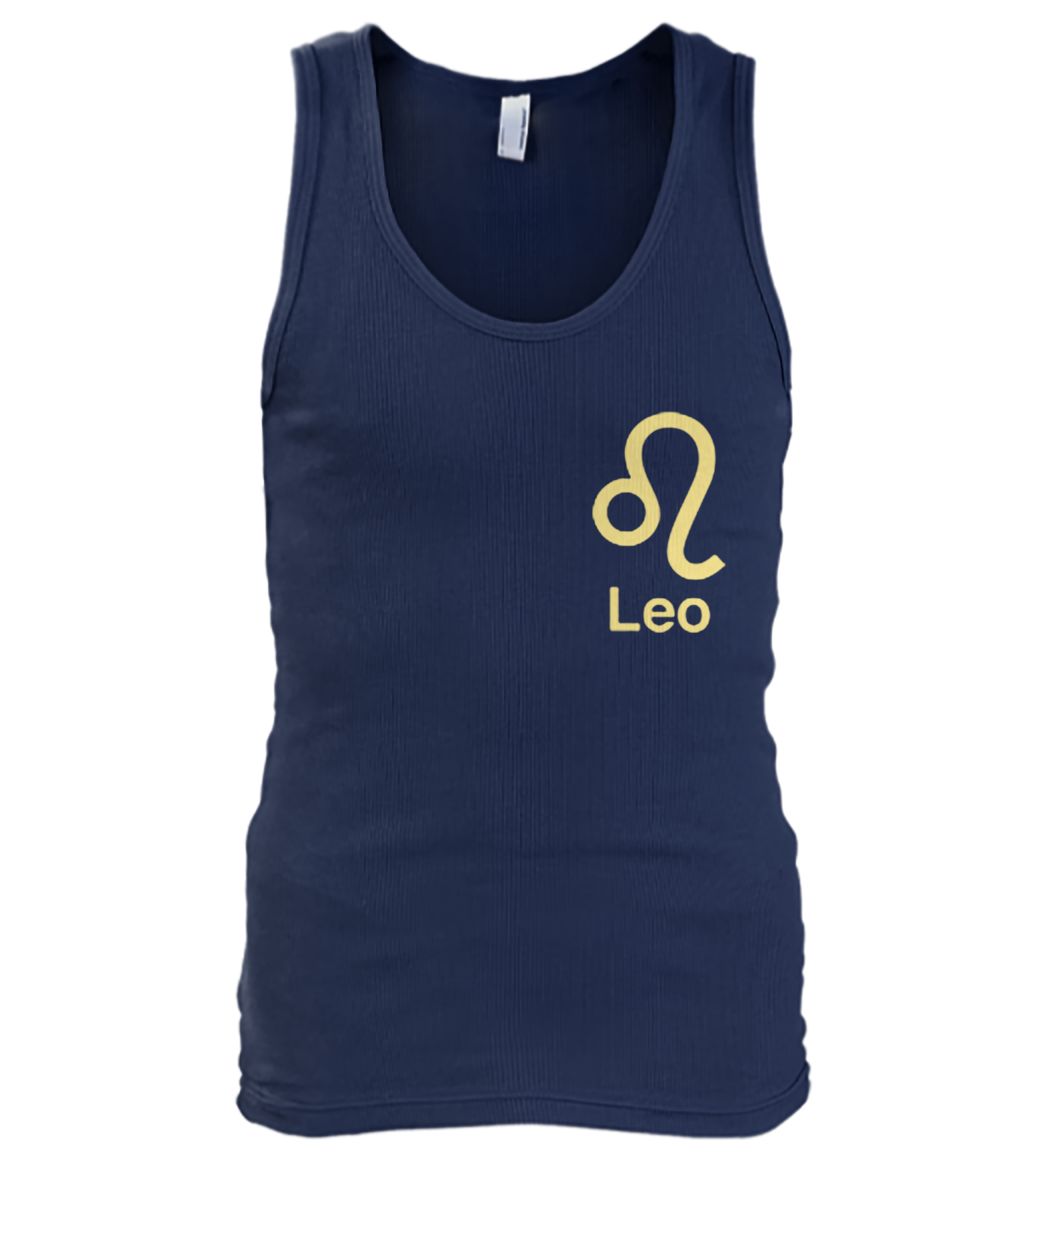 Leo is the fifth sign of the zodiac men's tank top